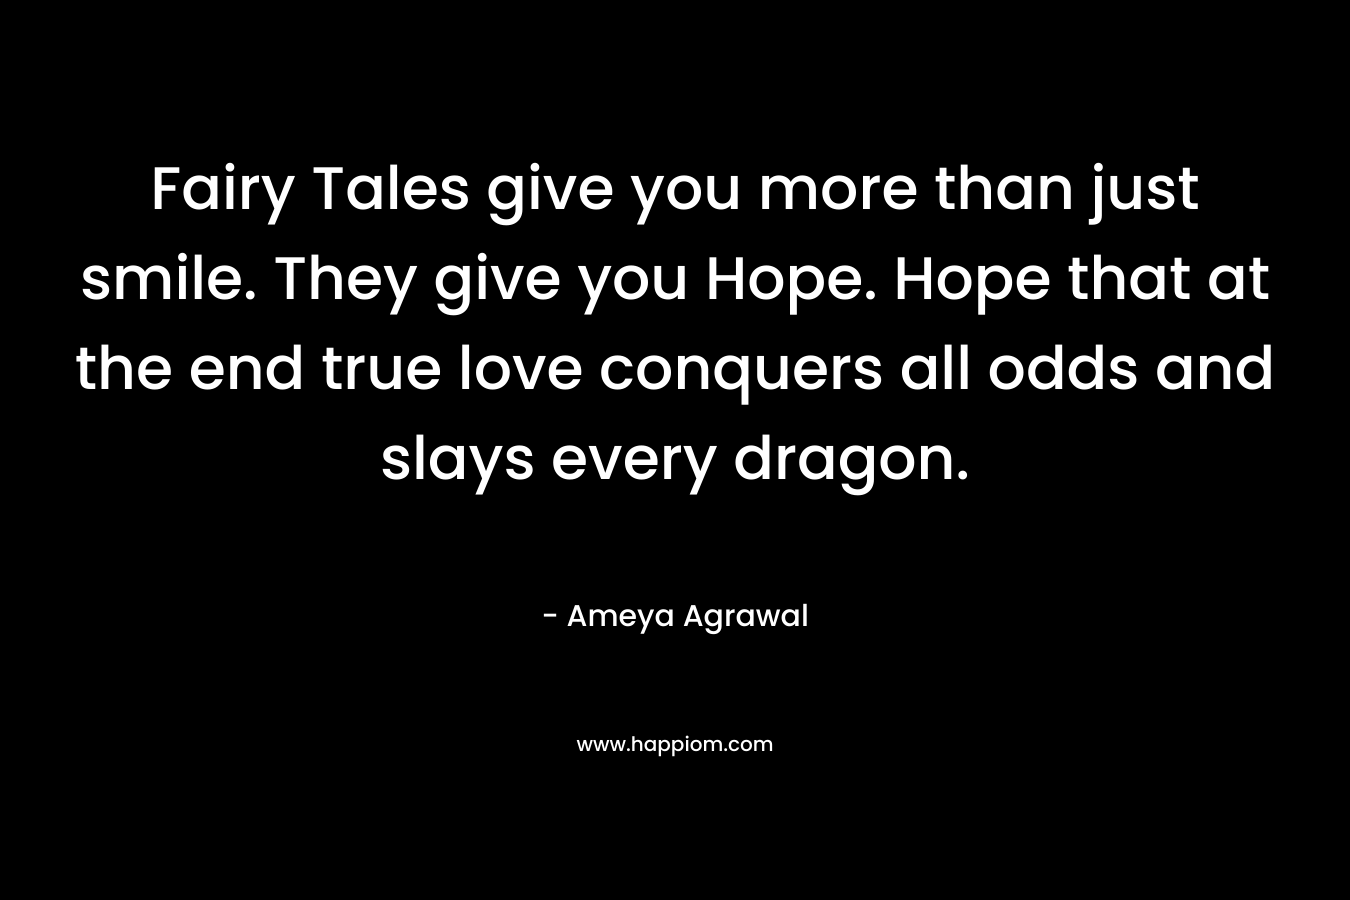 Fairy Tales give you more than just smile. They give you Hope. Hope that at the end true love conquers all odds and slays every dragon.